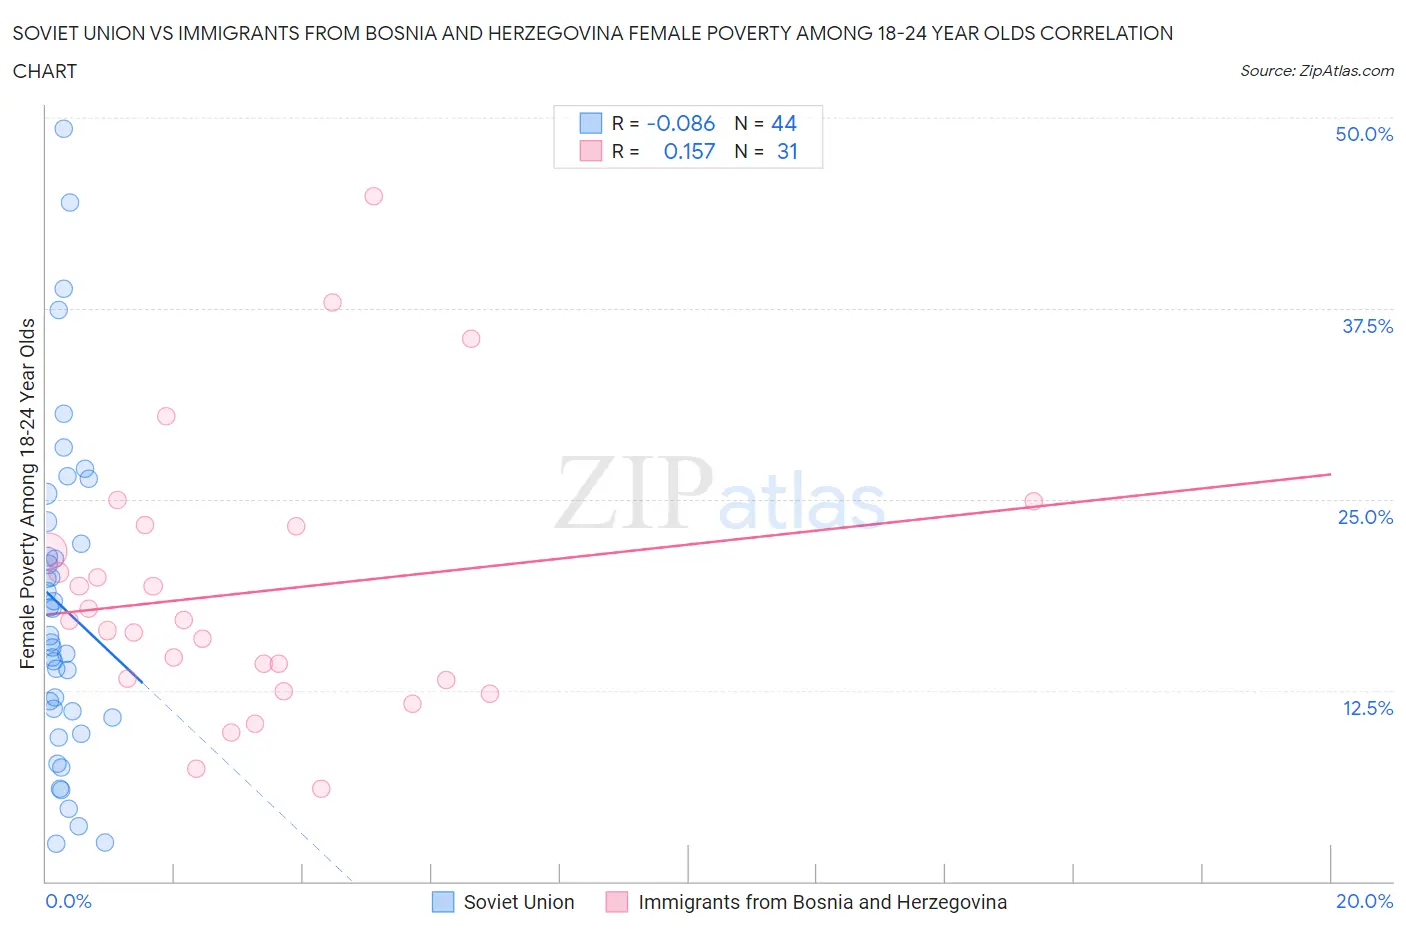 Soviet Union vs Immigrants from Bosnia and Herzegovina Female Poverty Among 18-24 Year Olds